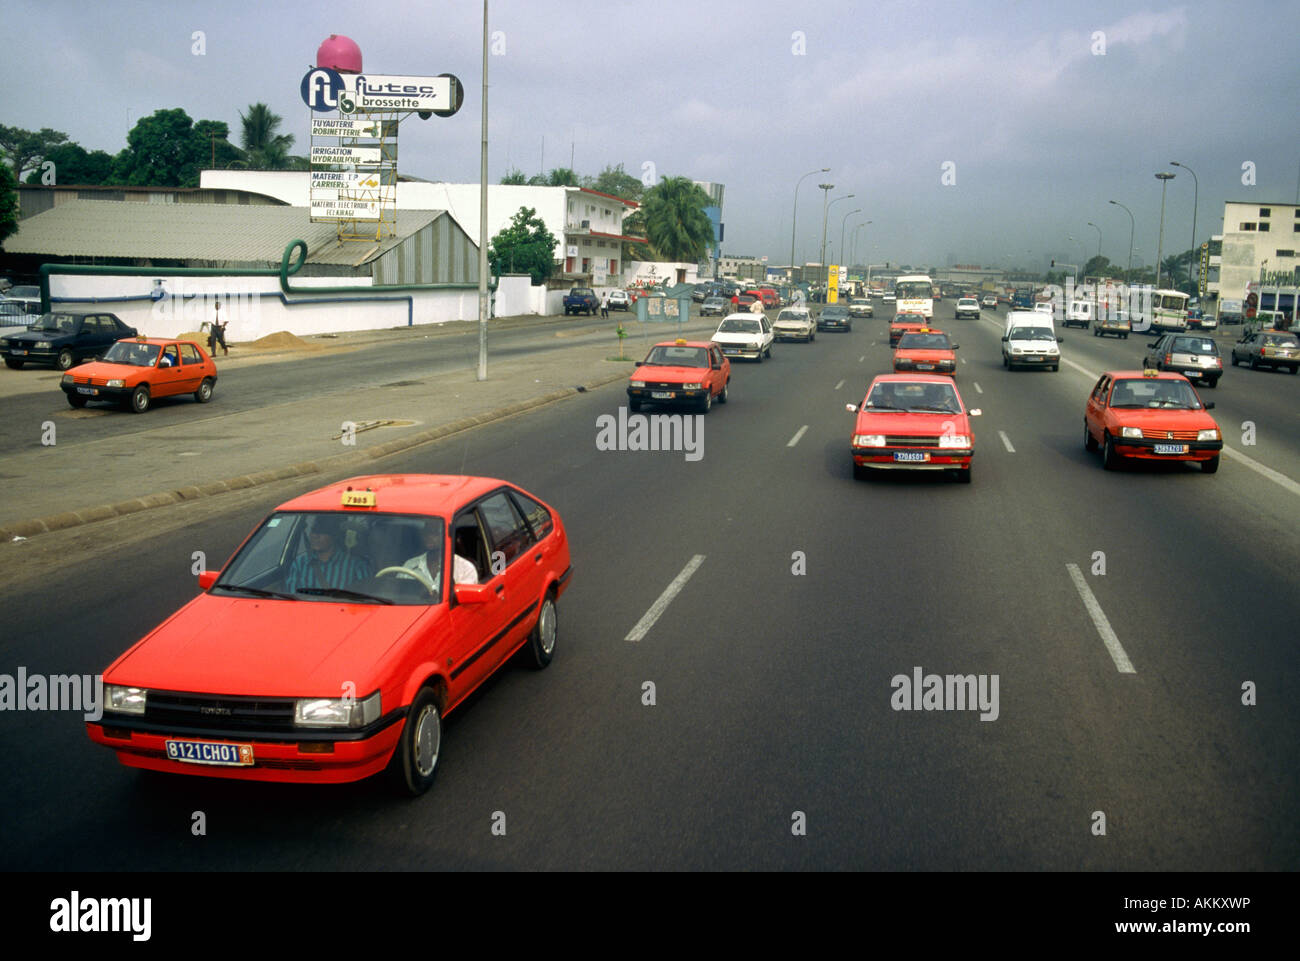 Orange taxis drive on a six lane highway in Abidjan Cote d'Ivoire Stock Photo